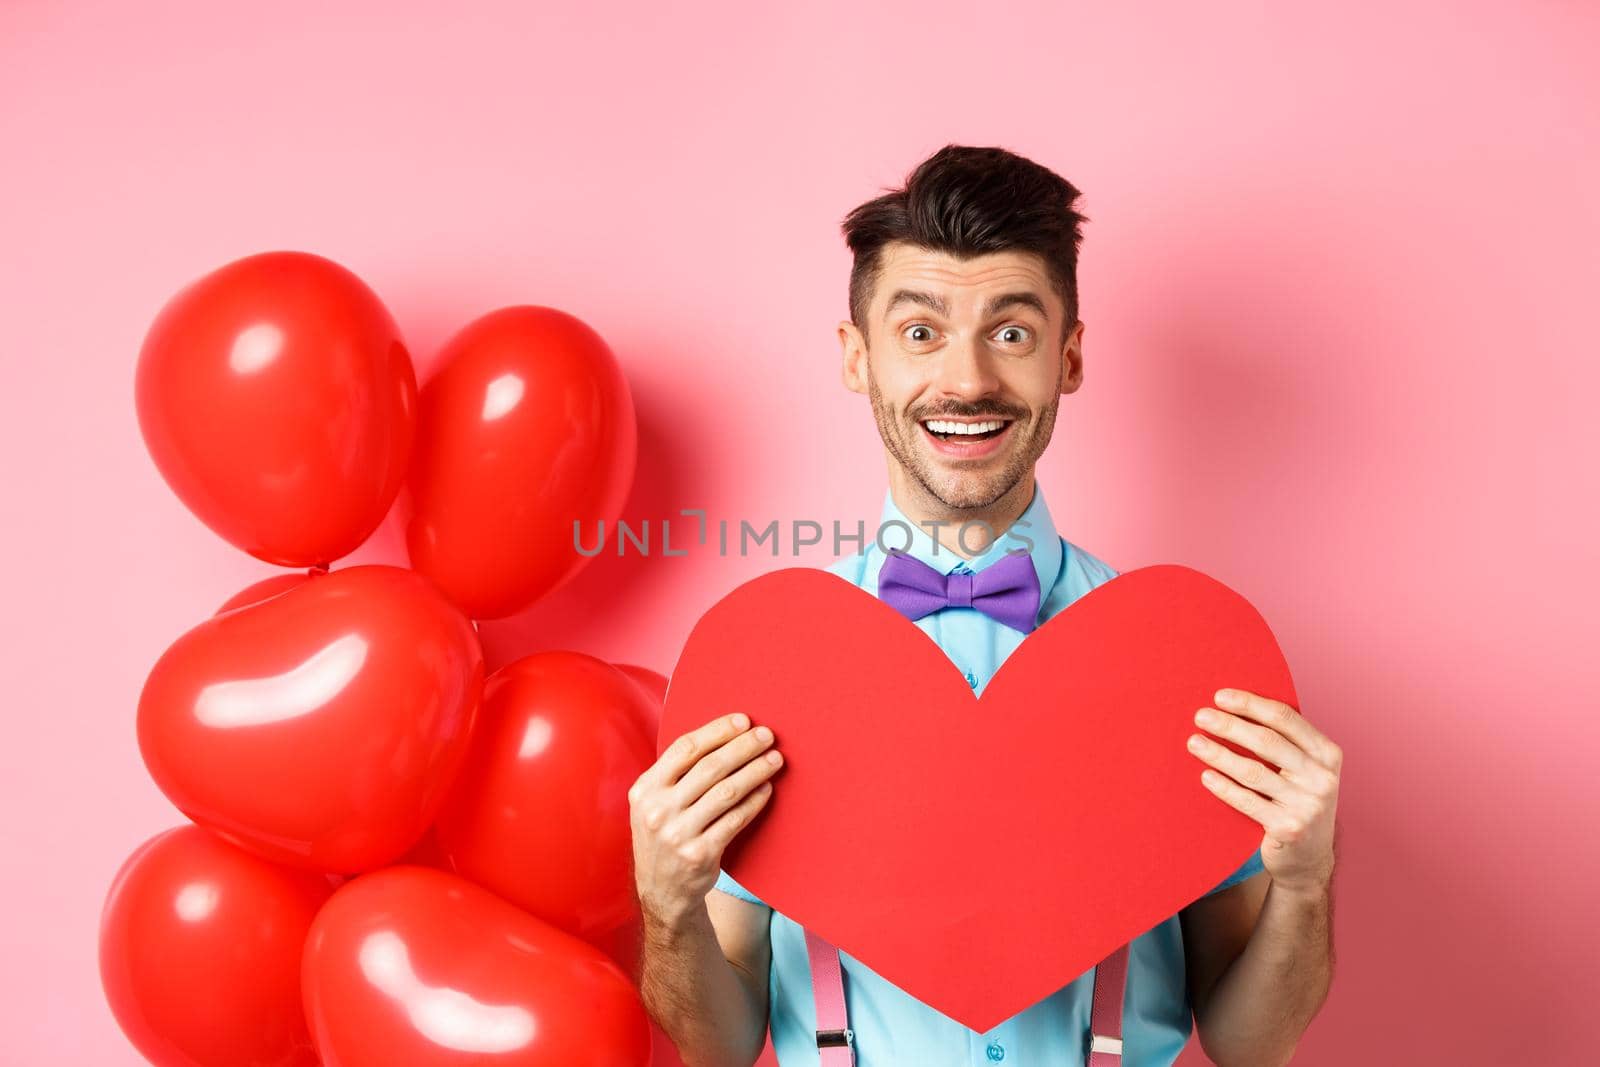 Valentines day concept. Cute young man in bow-tie showing big red heart postcard and say love you, smiling happy at camera, standing on romantic pink background.